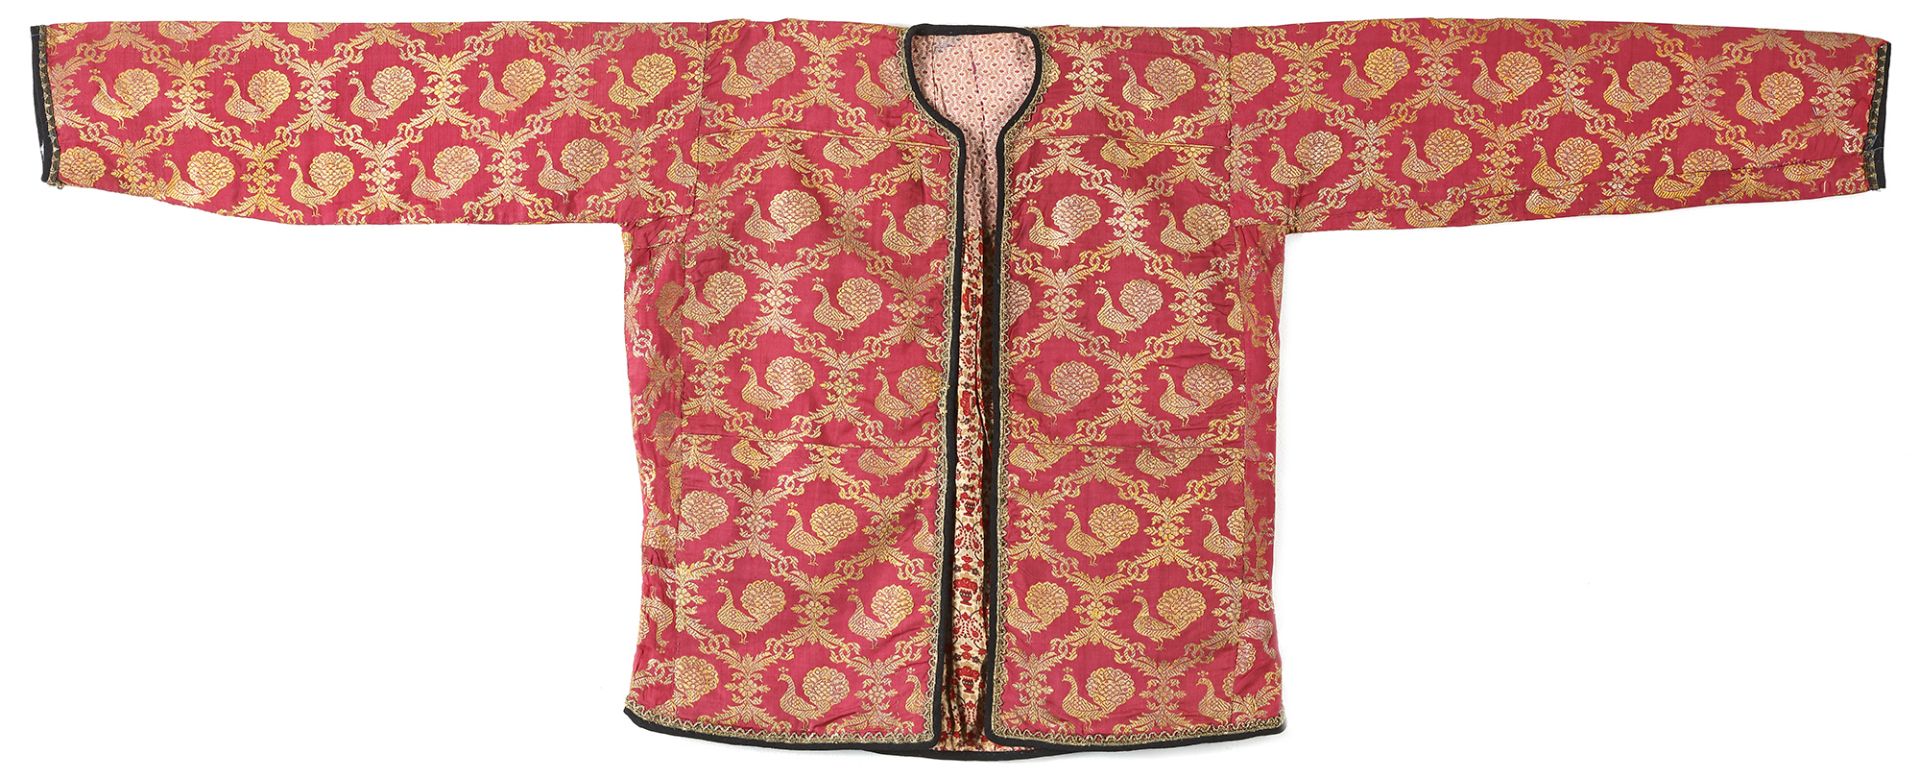 A PERSIAN RED WITH GILT QUILTED CHILDRENS WAISTCOAT, 19TH CENTURY